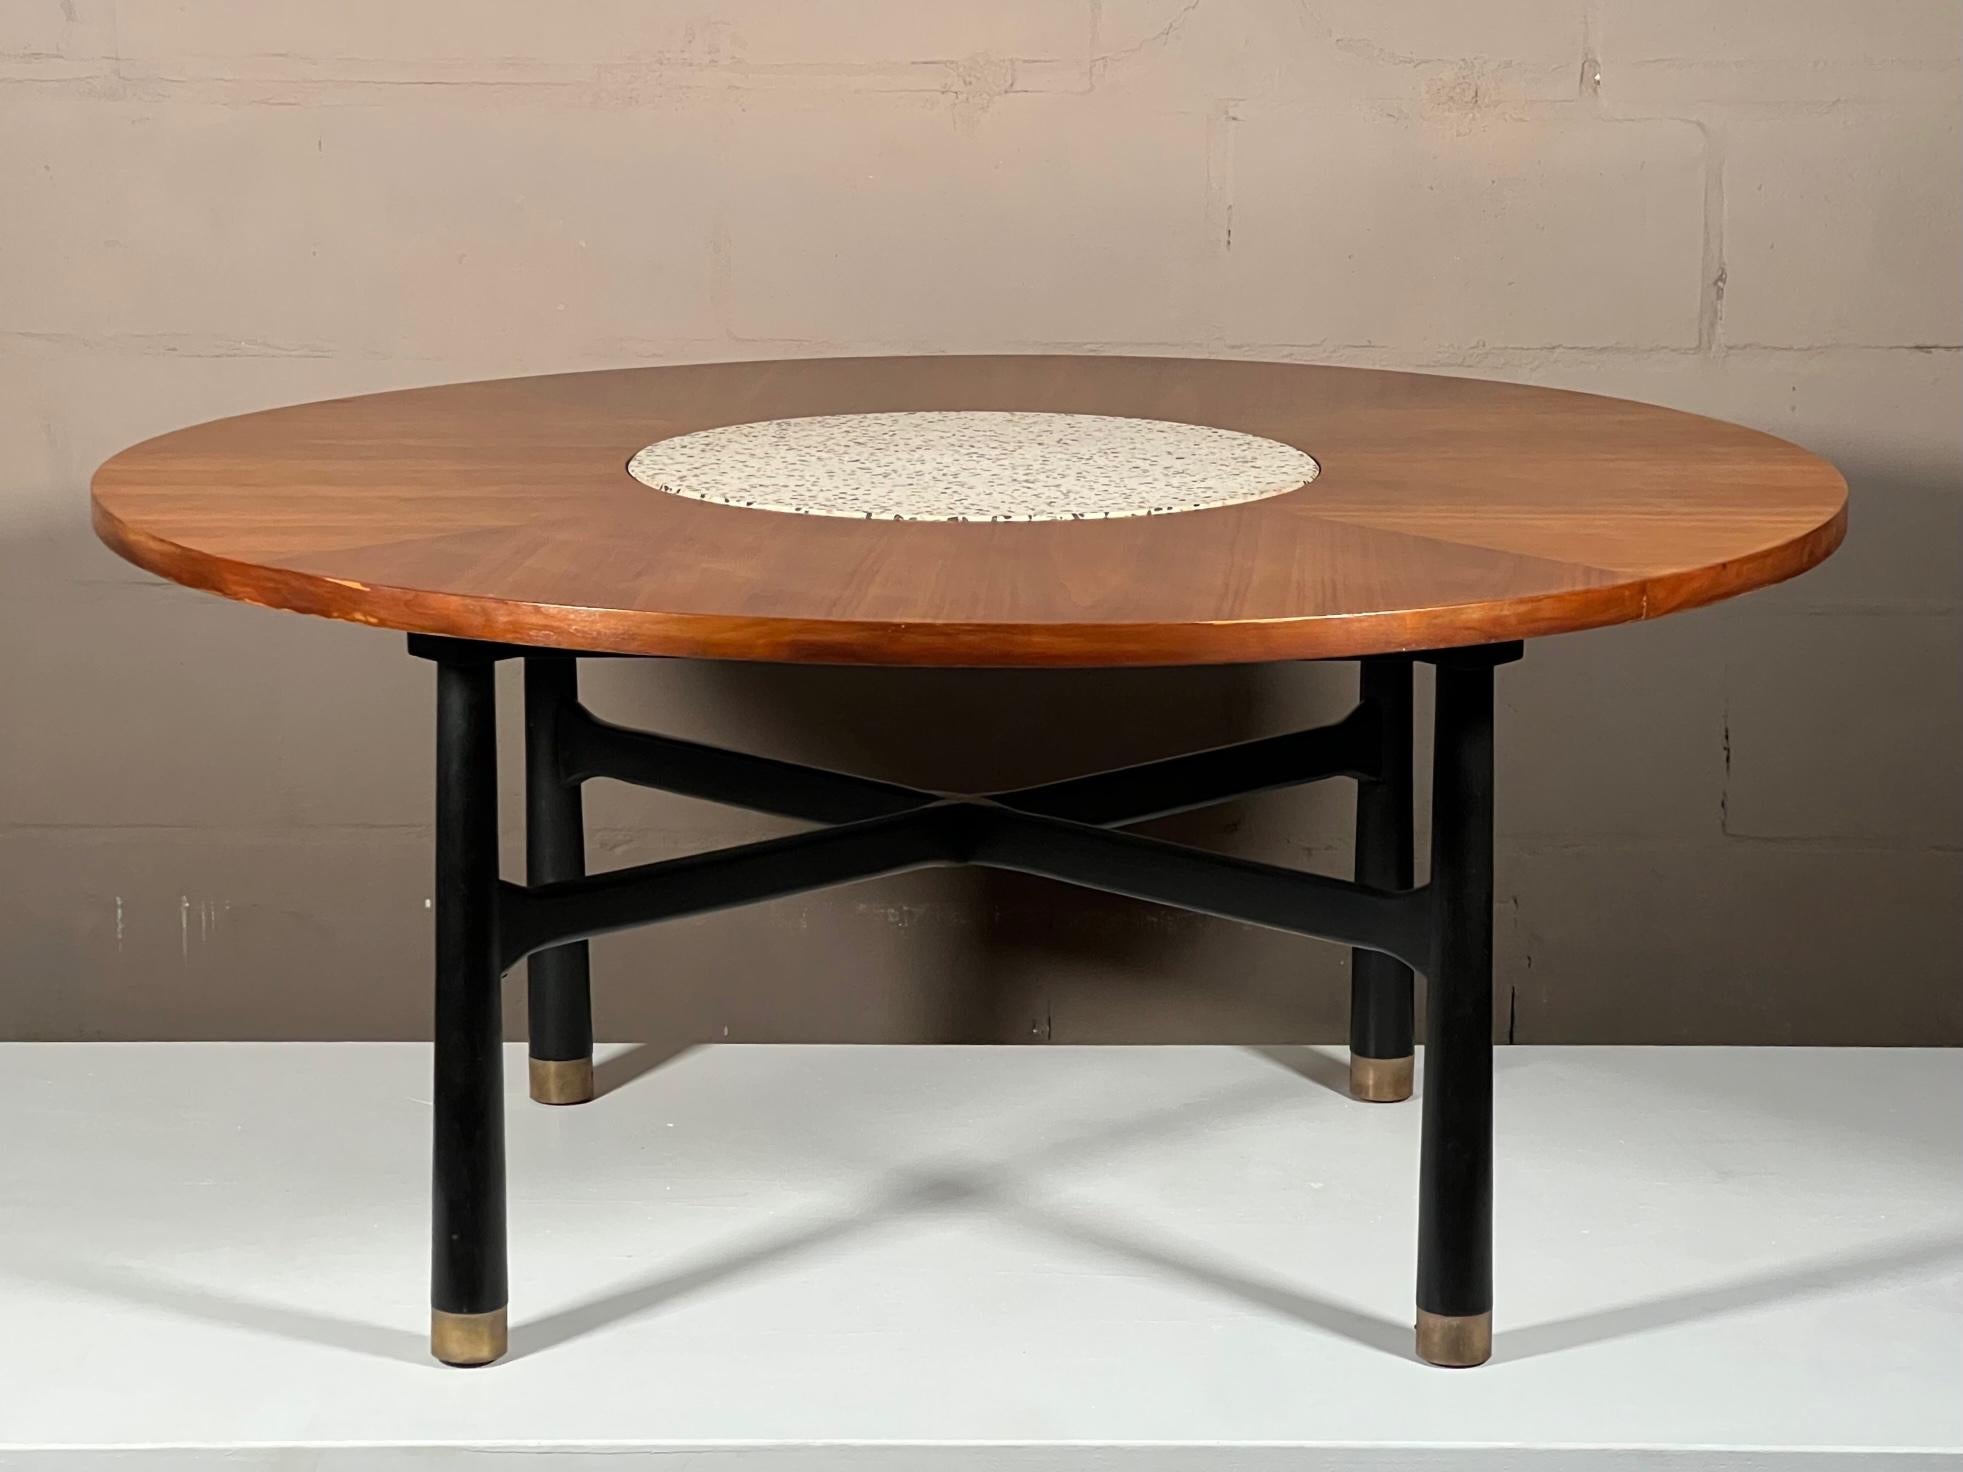 A stylish mid-century coffee or cocktail table-tall at 24